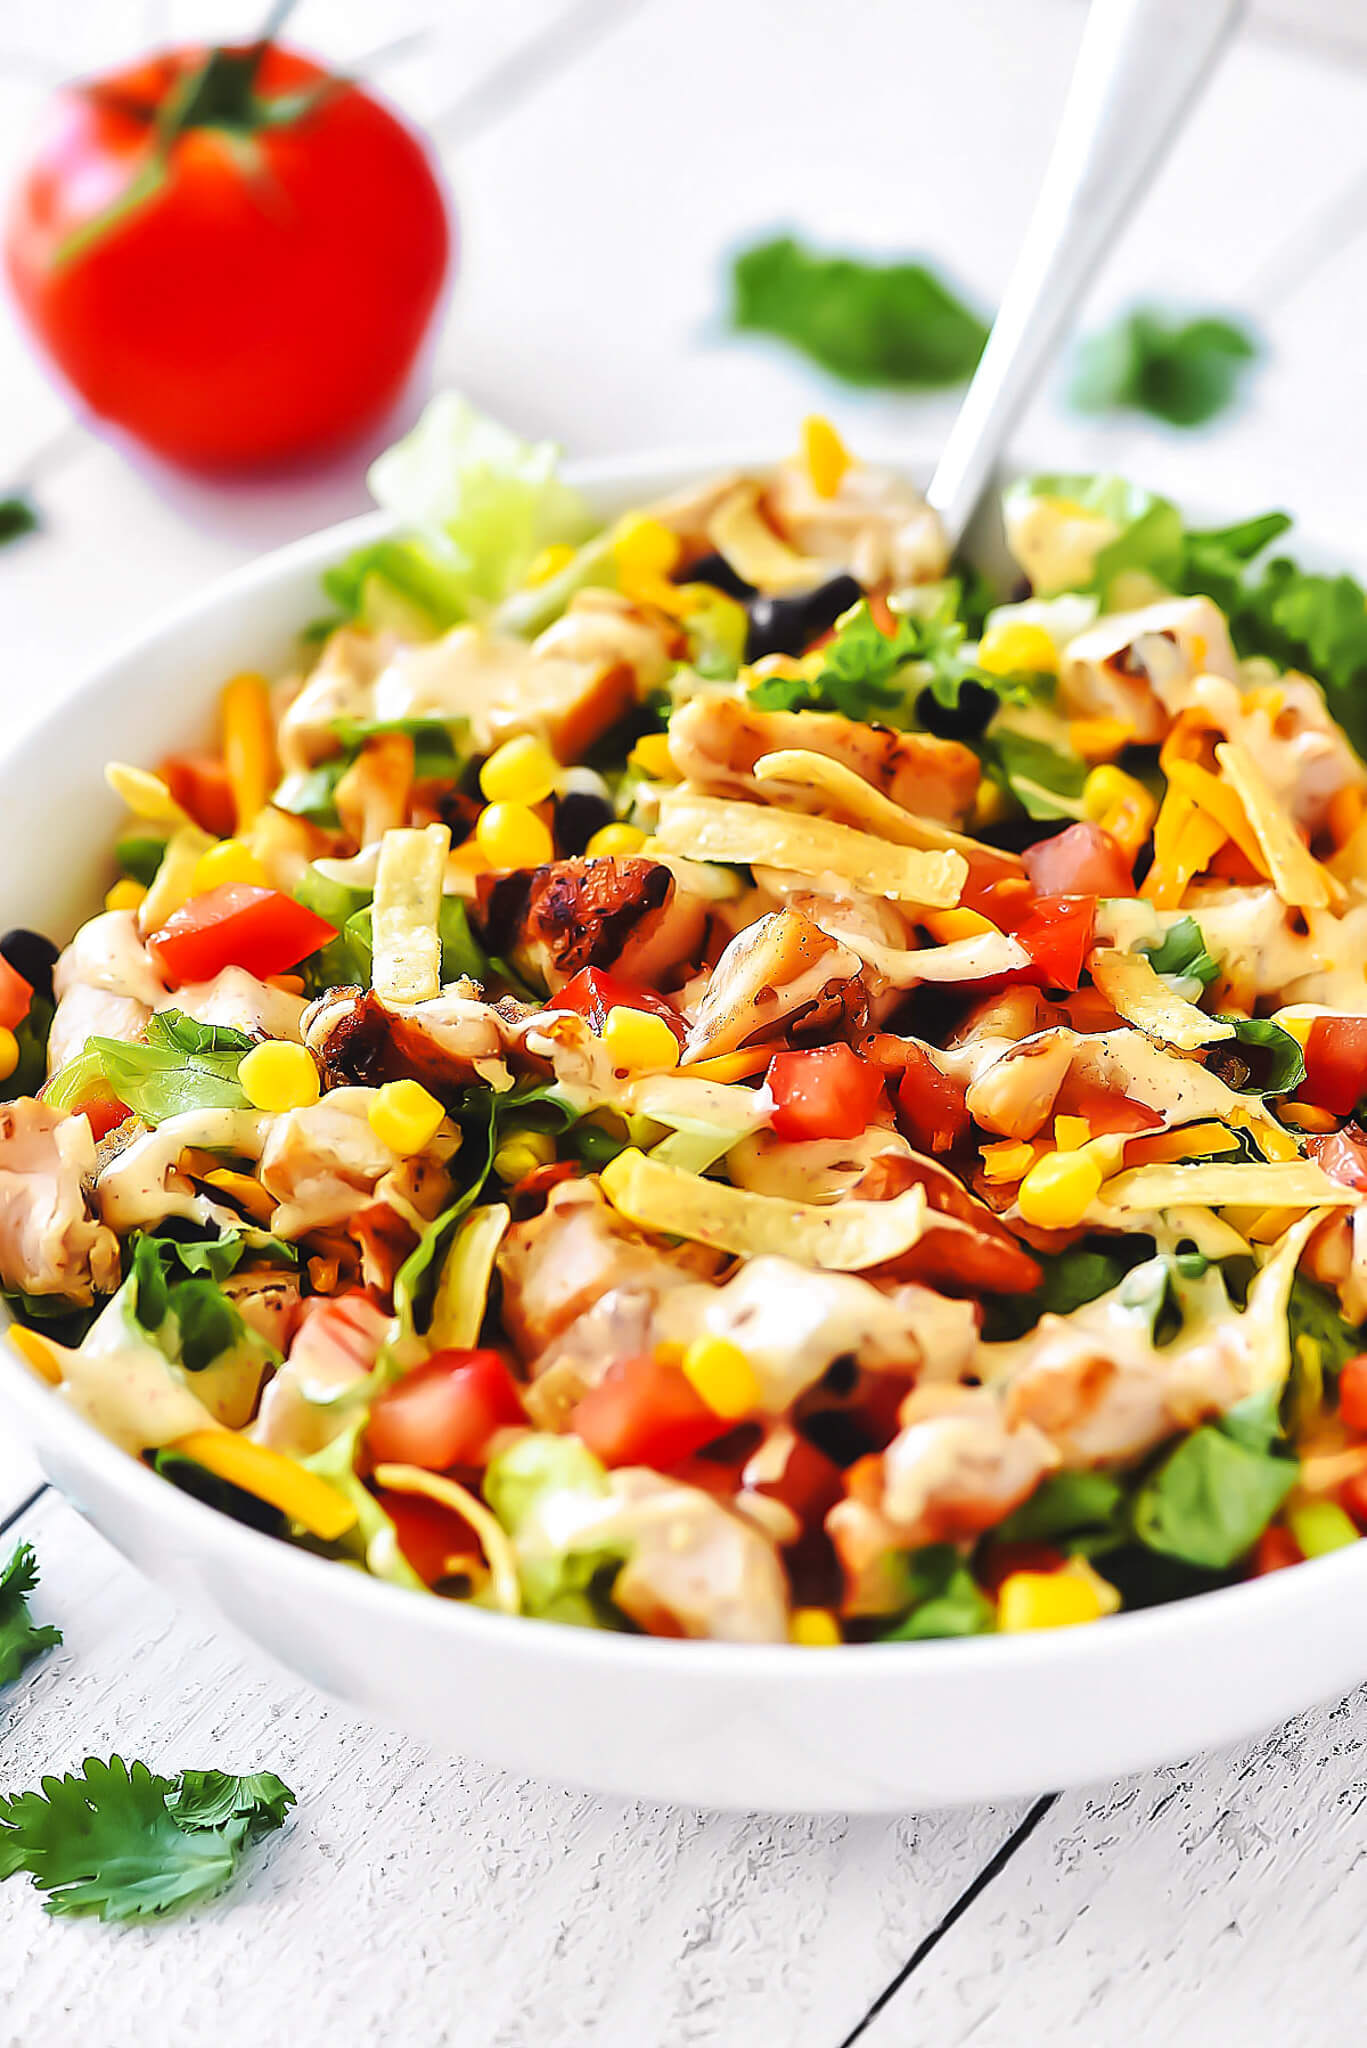 We're talking crisp romaine lettuce, sweet corn, hearty black beans, juicy tomatoes, fresh green onions, and, the star of the show, some killer grilled chicken.